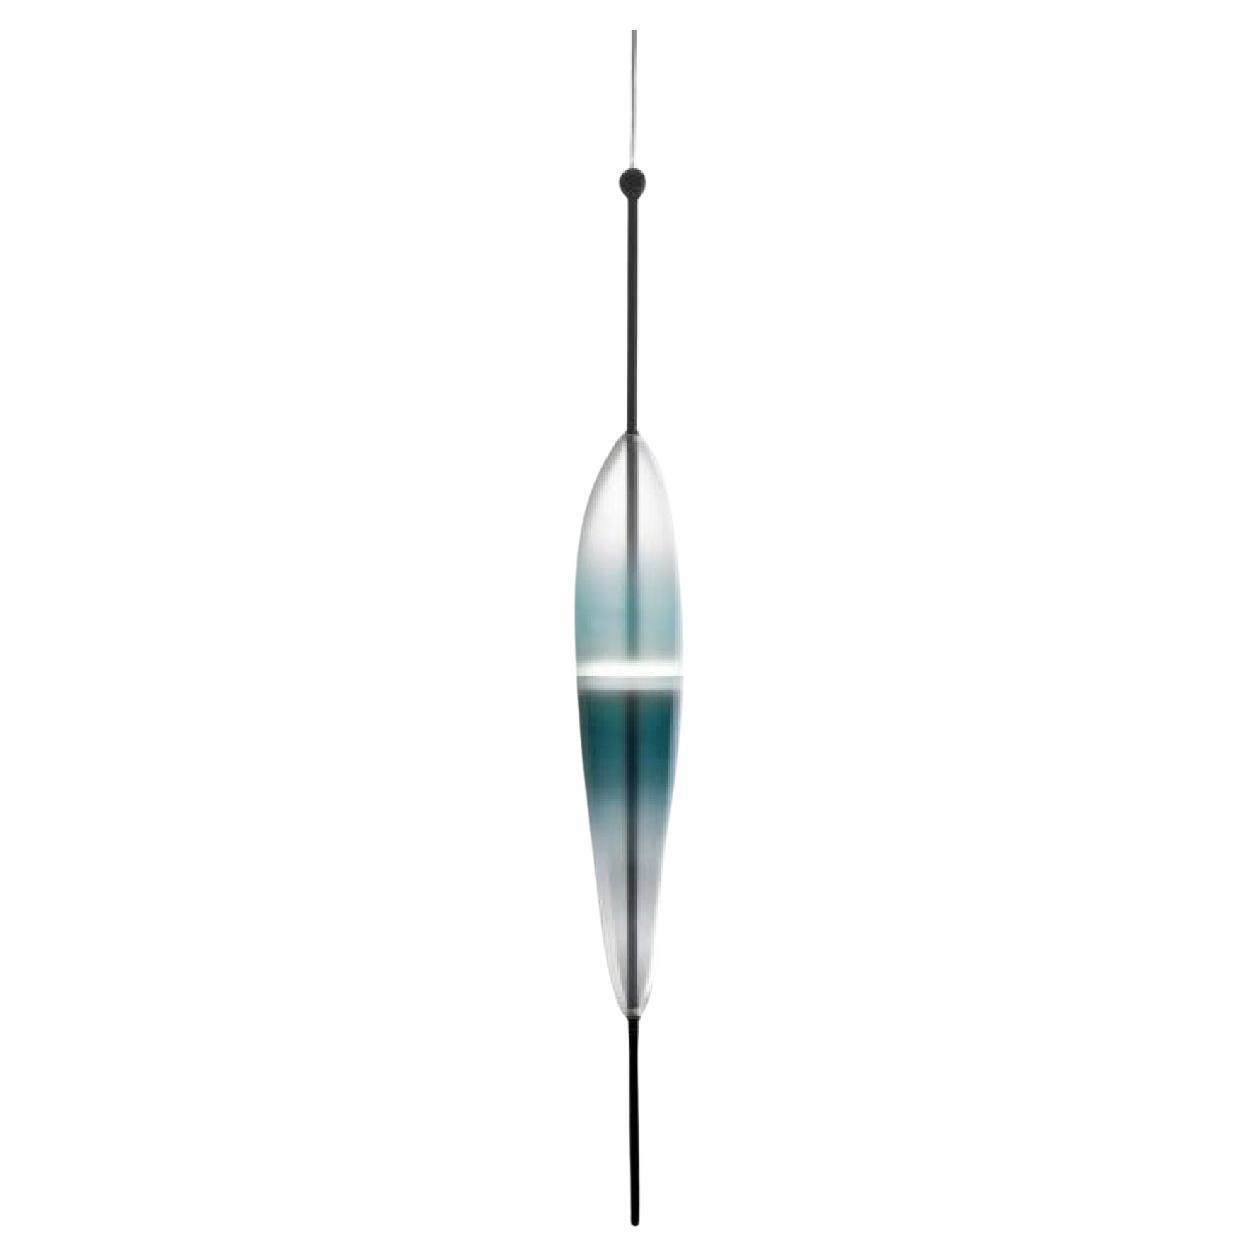 FLOW[T] S2 Pendant lamp in Turquoise by Nao Tamura for Wonderglass For Sale